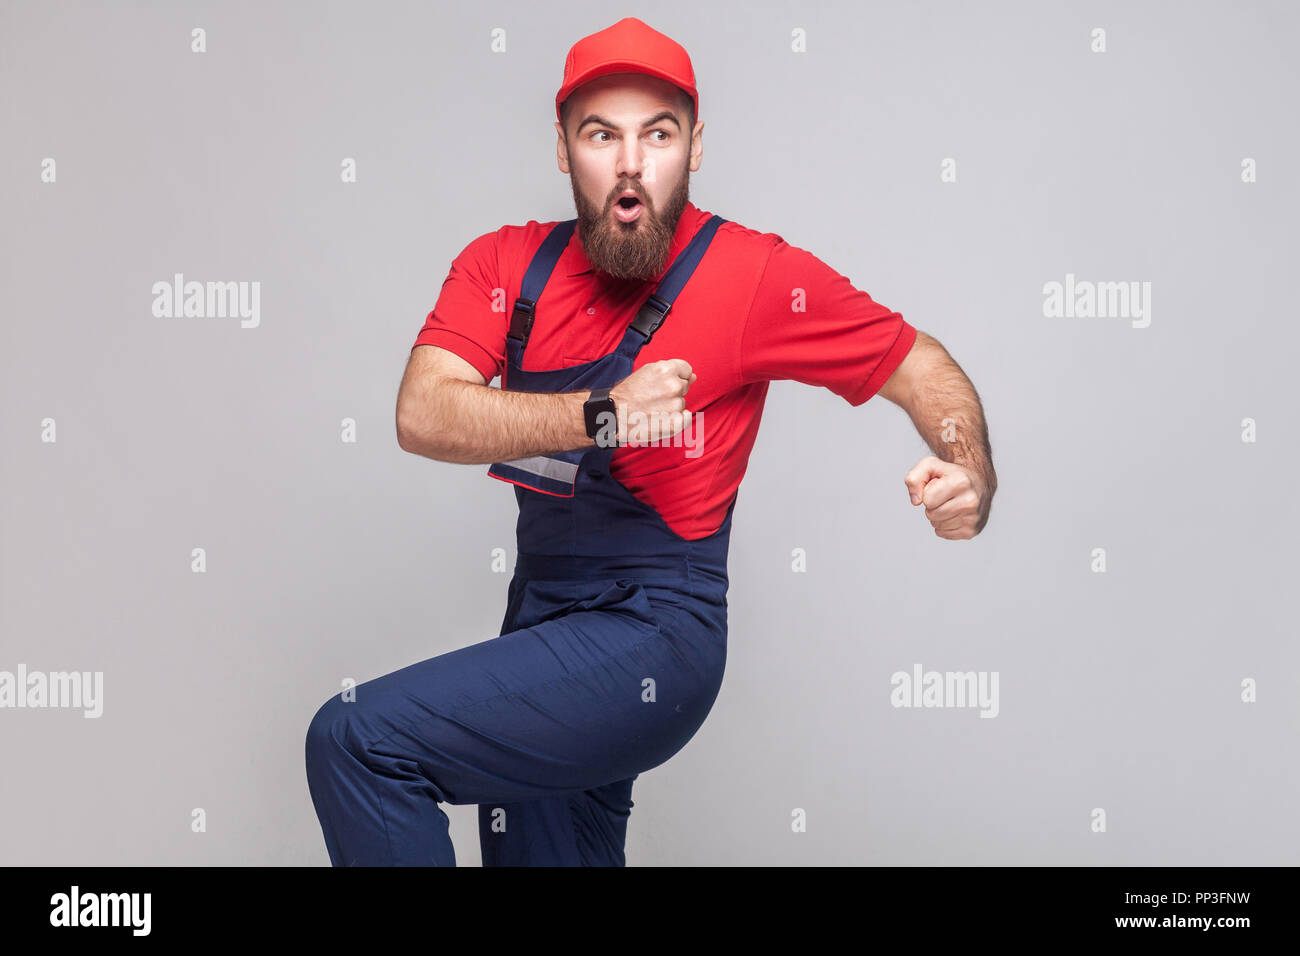 Hurry up! Young amazed handyman with beard in blue overall, red t-shirt and cap are late and starting to run for help on time. Grey background, indoor Stock Photo